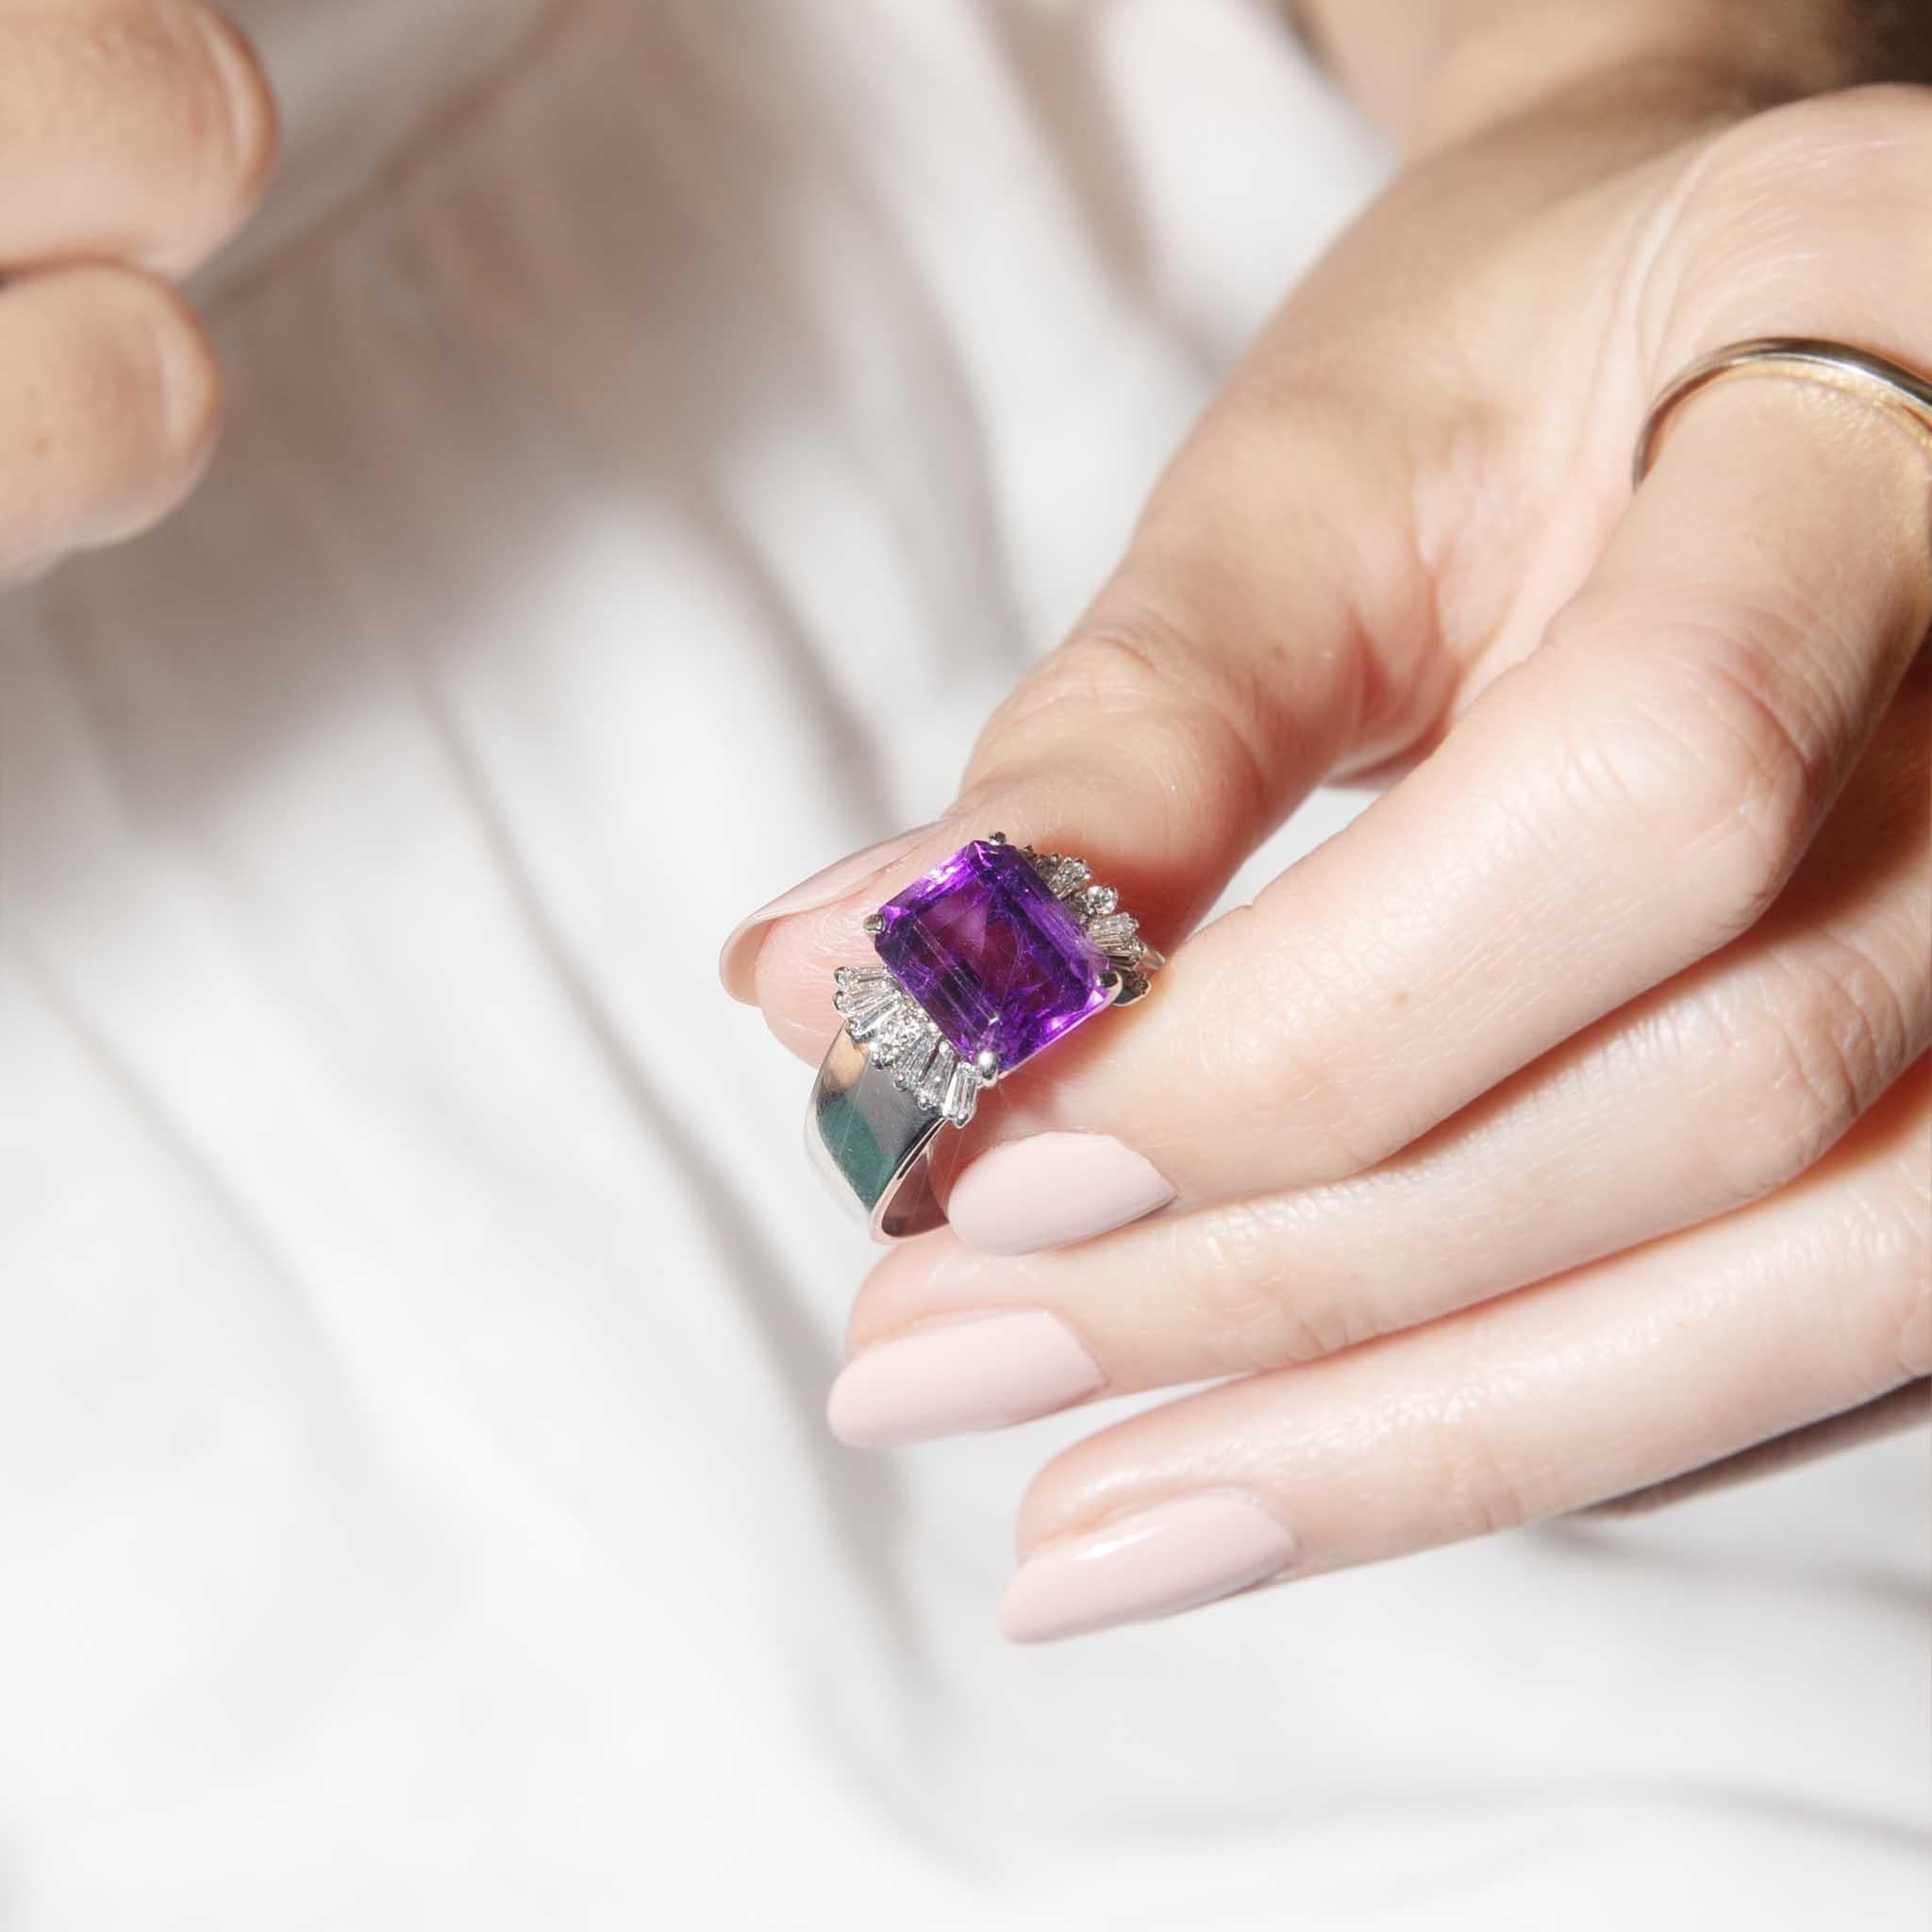 Bold and irresistible, The Alexis Ring is a celebration of colour and light.  Her vivid amethyst sits bookended by fireworks of sparkling diamonds.  Crafted in 18 carat white gold she is a much needed folly.

The Adrianna Ring Gem Details
The